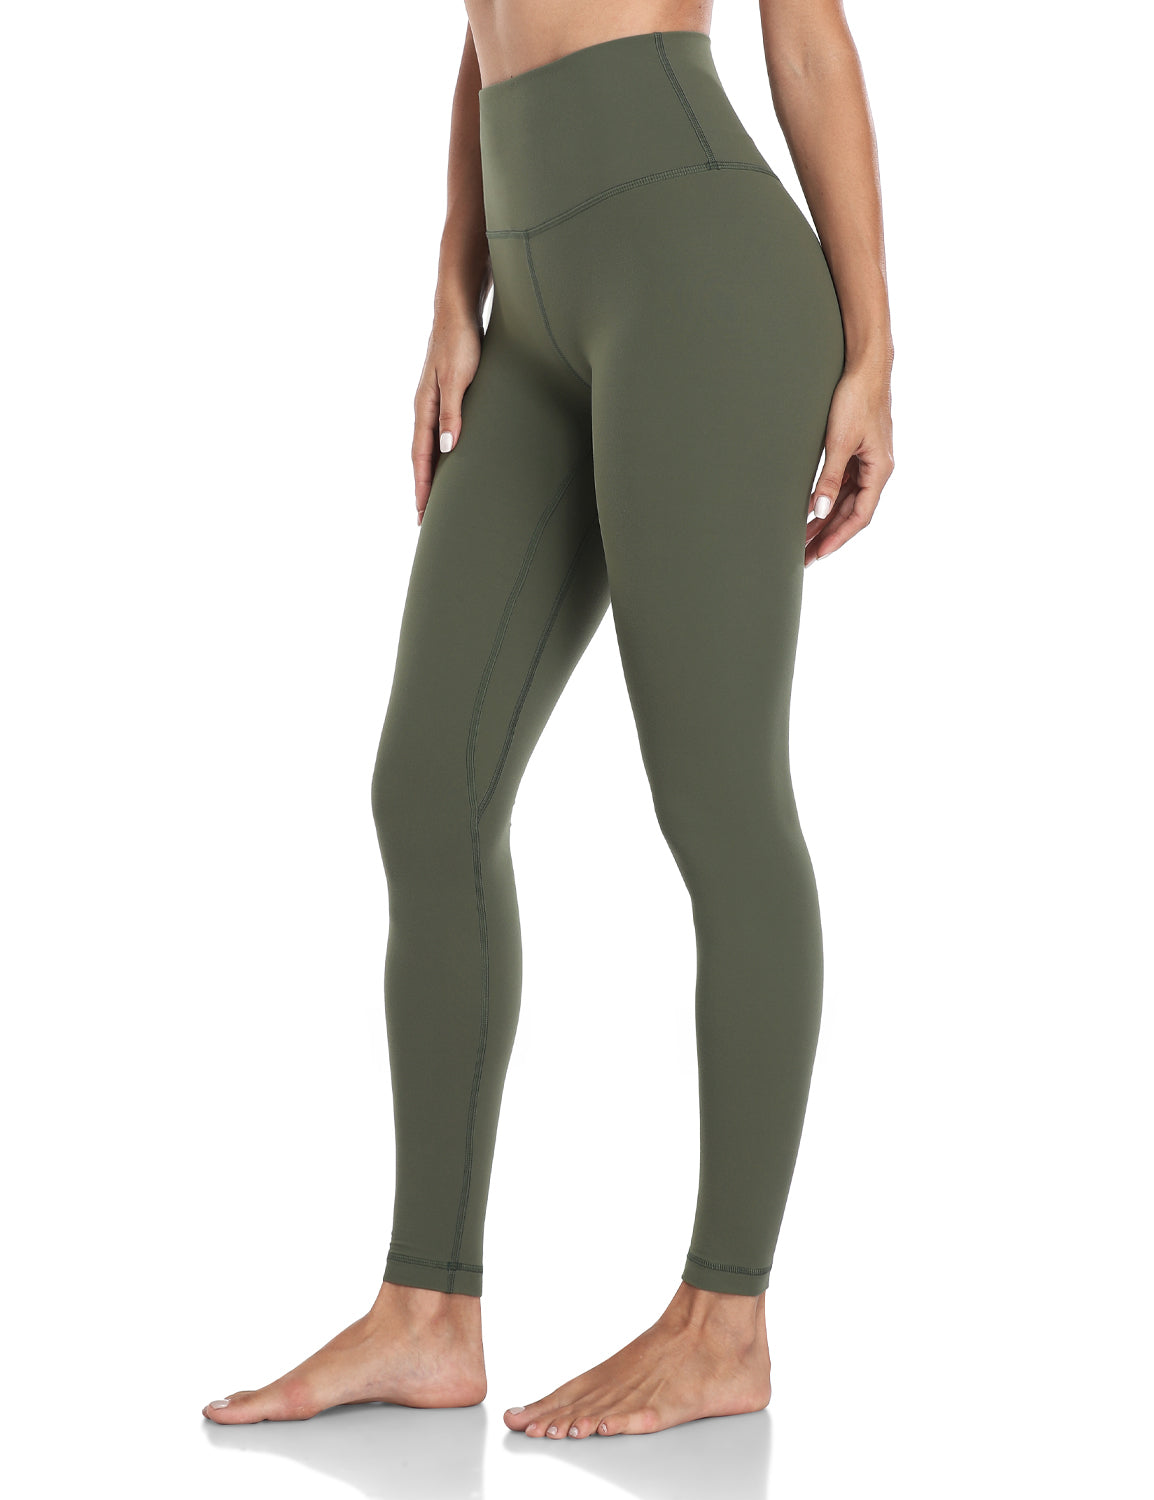 Workout Leggings Manufacturer and Wholesale in China - NDH